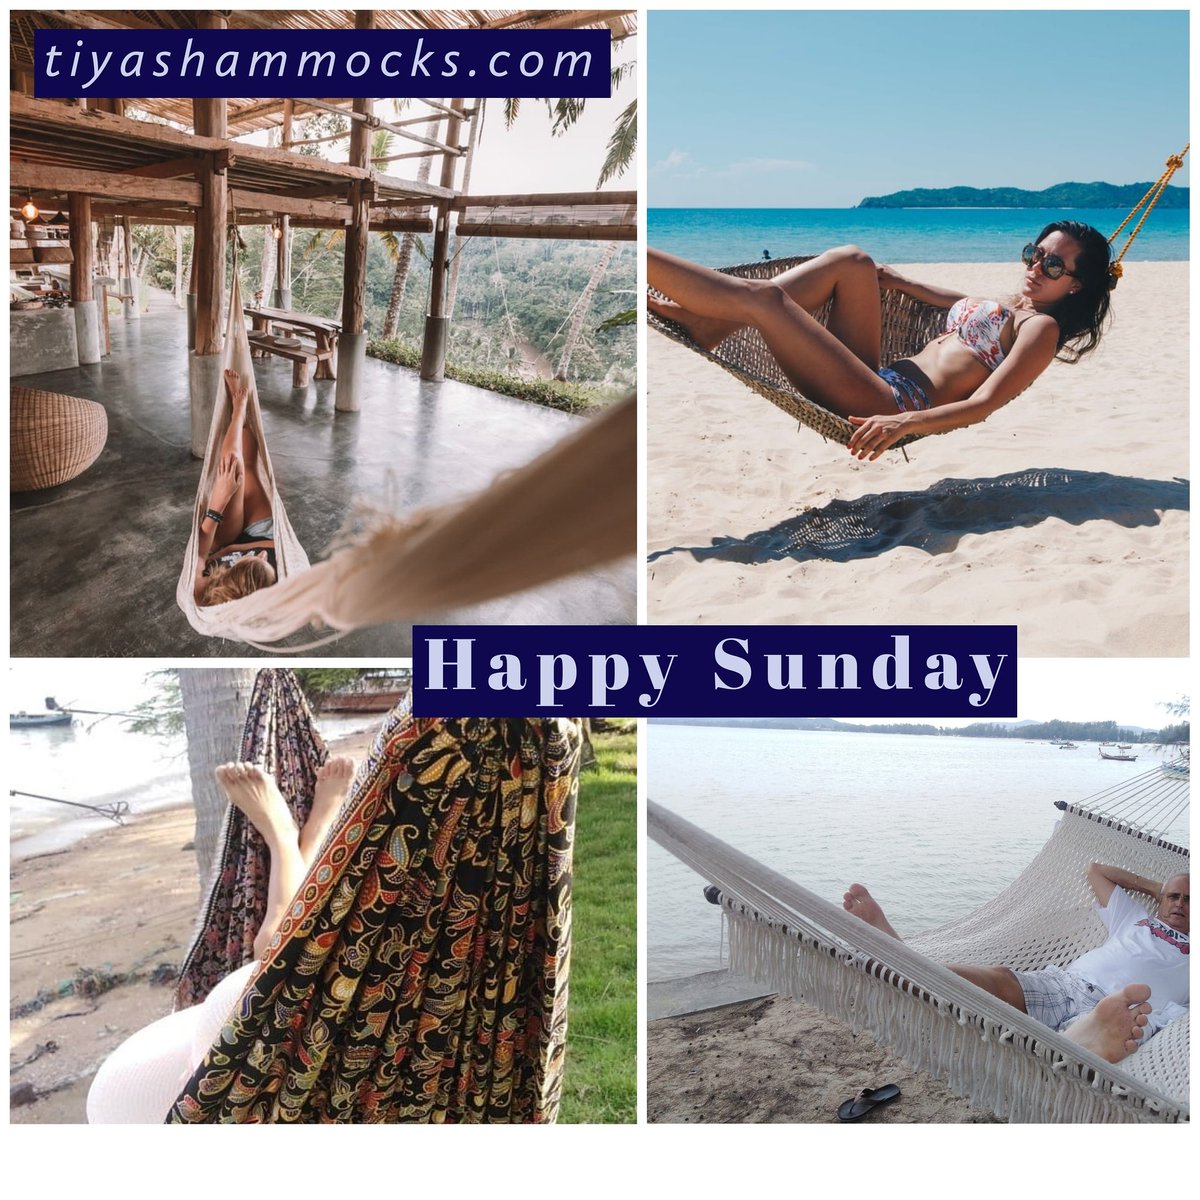 Hang your favorite hammock and have a great Sunday 😀
🐌
#tiyashammocks #hammockphuket #hammock #hammocks #hammocklife #hammockliving #hammocklifestyle #hammockthailand #hammocktime #hammocking #phuket #phuketthailand #thailand #handmadehammock #islandlife #phukethammock #sunday